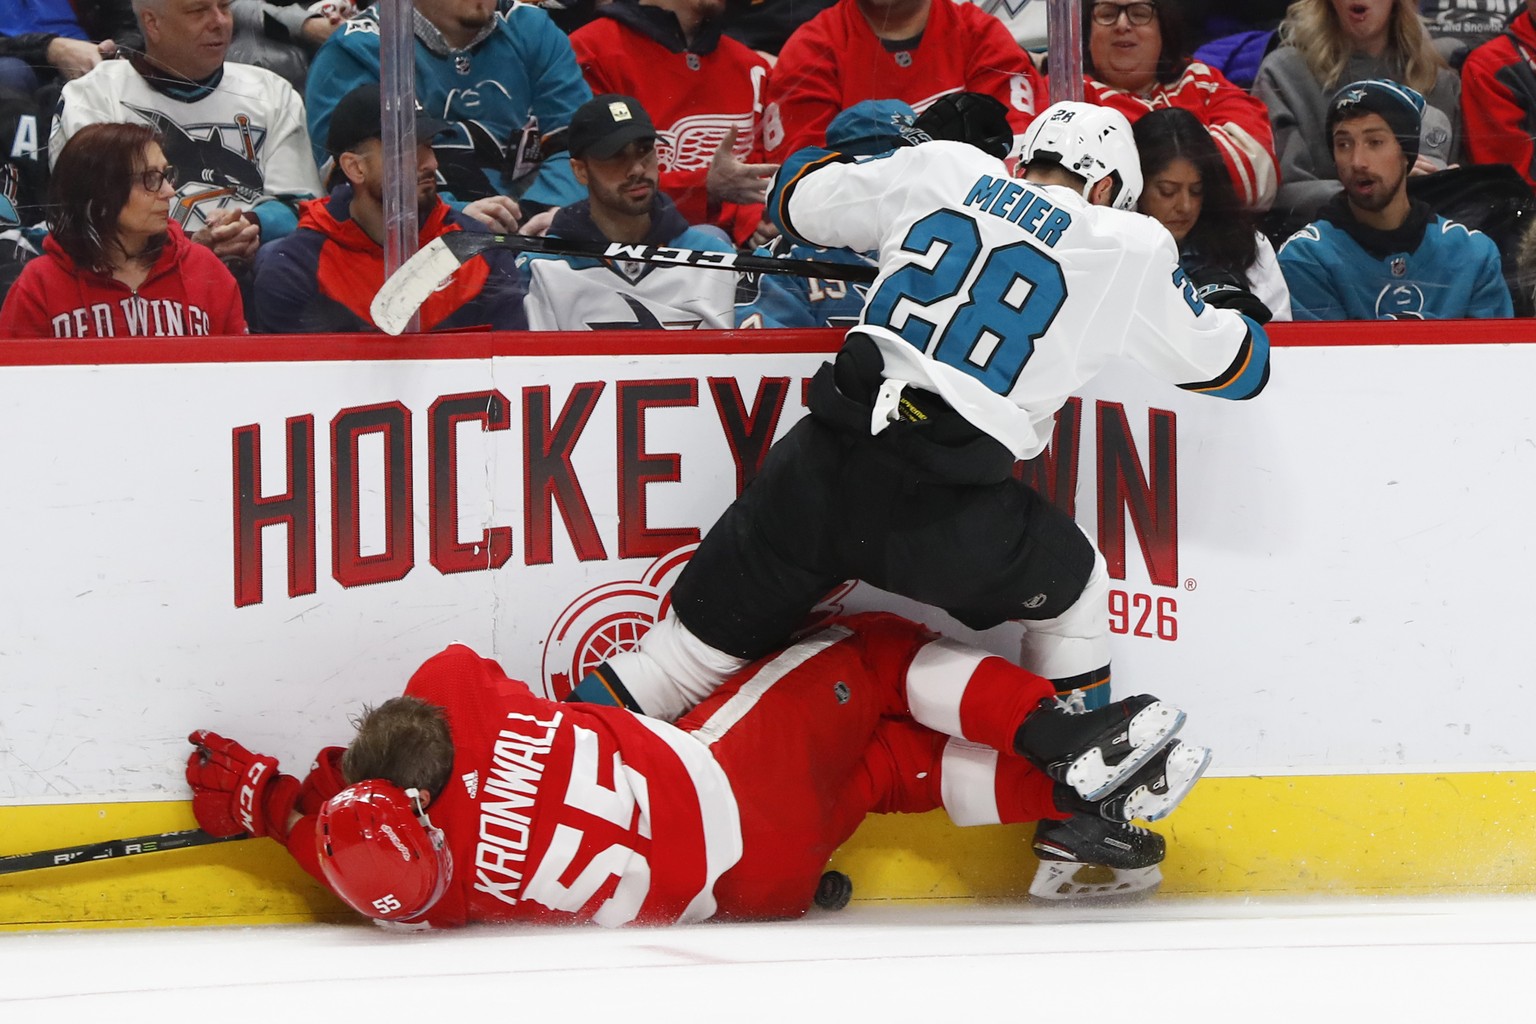 San Jose Sharks right wing Timo Meier (28) checks Detroit Red Wings defenseman Niklas Kronwall (55) in the first period of an NHL hockey game Sunday, Feb. 24, 2019, in Detroit. (AP Photo/Paul Sancya)